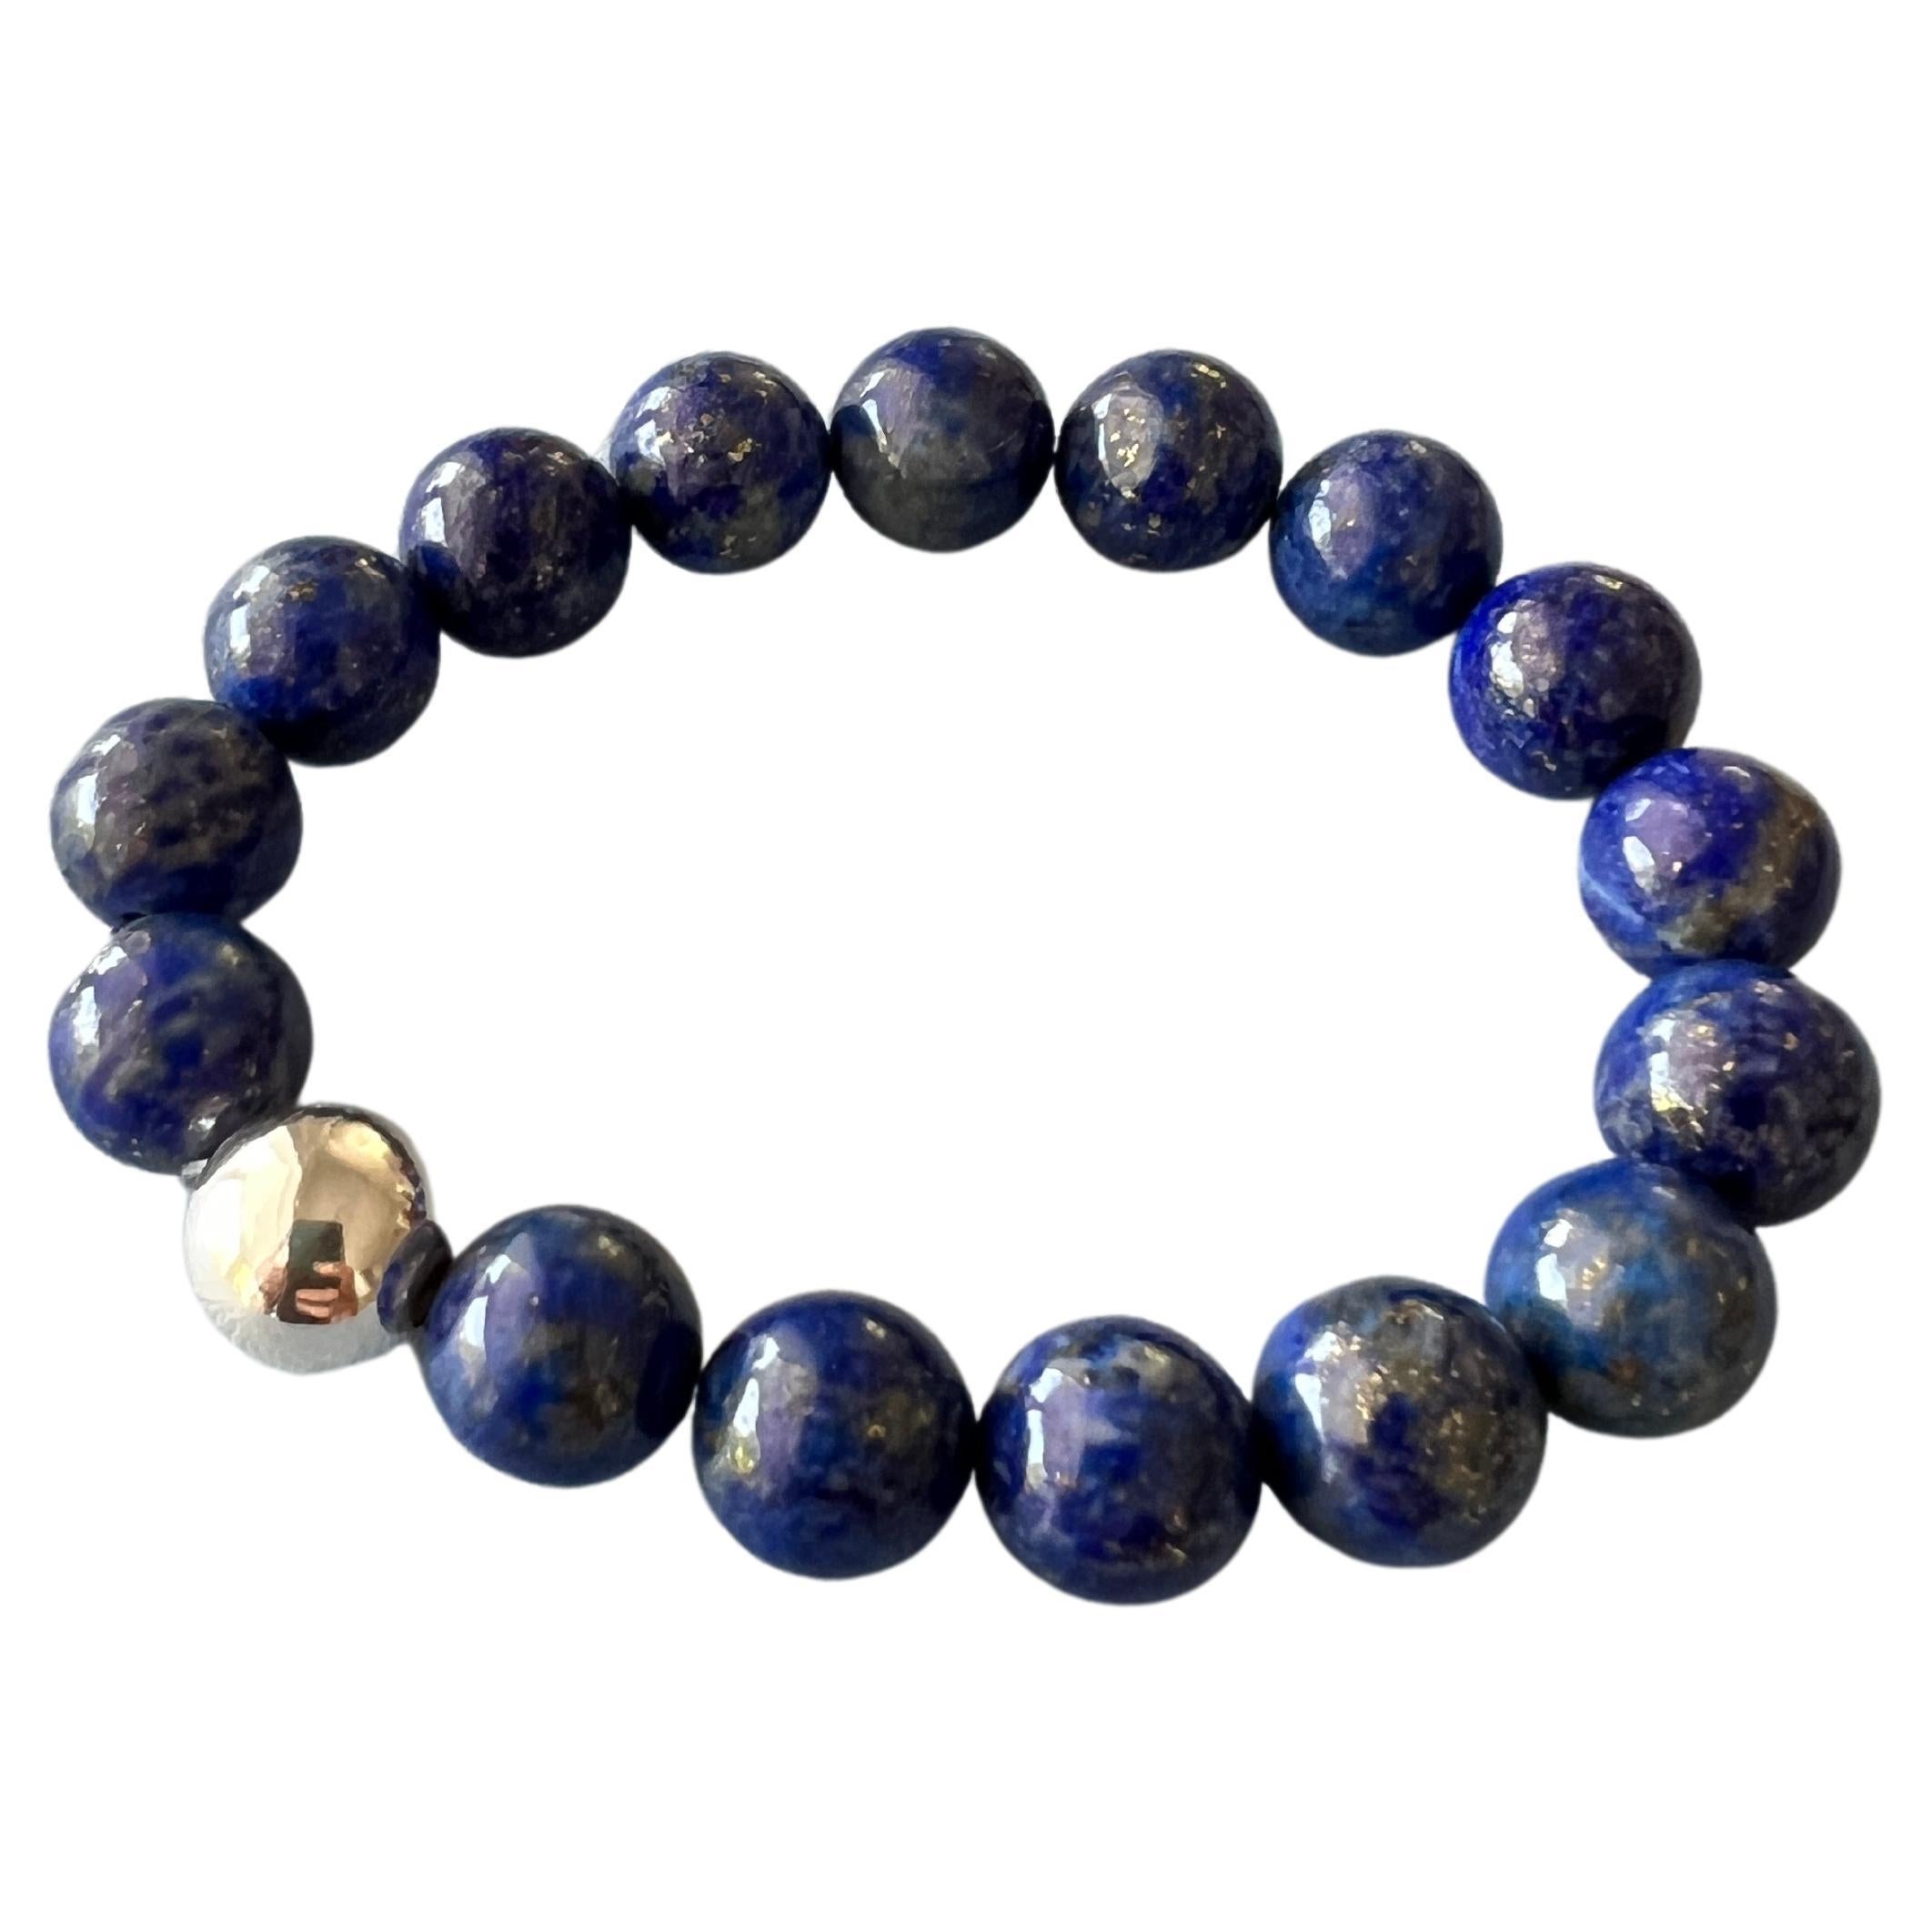 Blue Labradorite Round Bead Stackable Elastic Bracelet with Silver Bead 

Made in Los Angeles

Designer: J Dauphin

Labradorite was first discovered in Labrador, Canada in the late 18th century, Labradorite is recognized for its unique